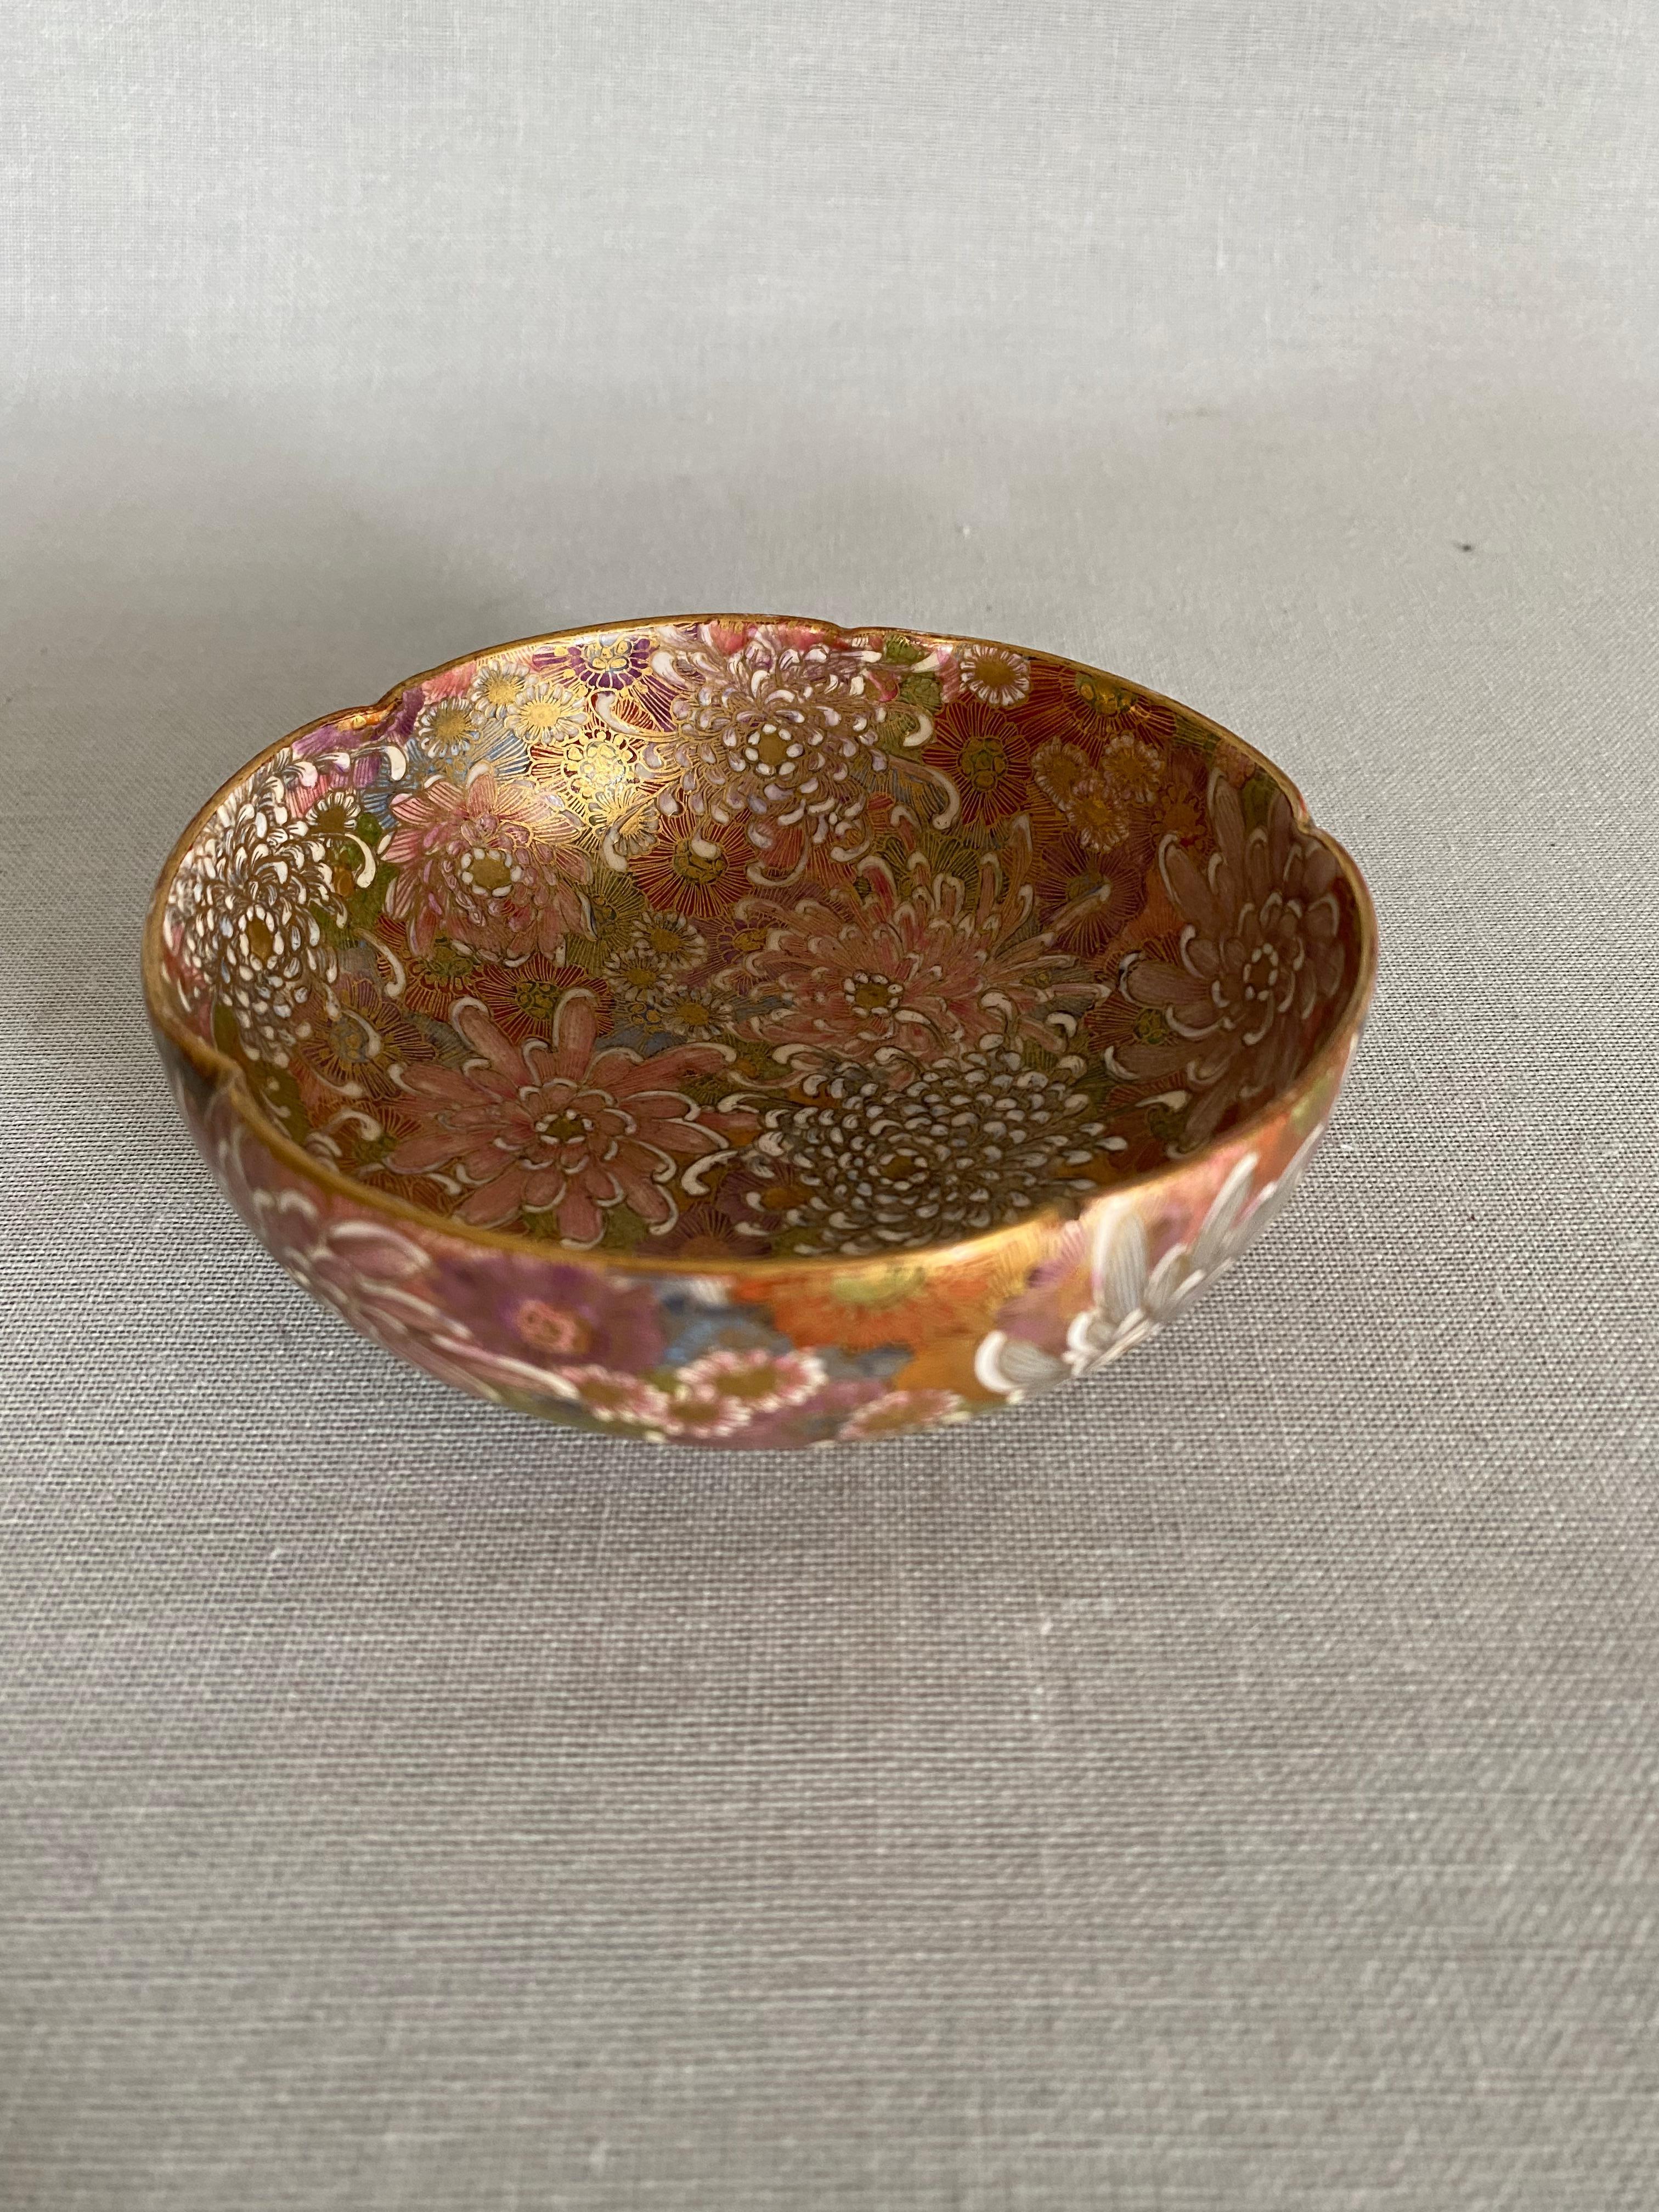 A round bowl decorated with various flowers, colorful chrysanthemum-filled ground emulating the Chinese style of porcelain known as mille fleur. Each leaf and detail with a fine gold outline.
Signed underneath with additional Shimanzu